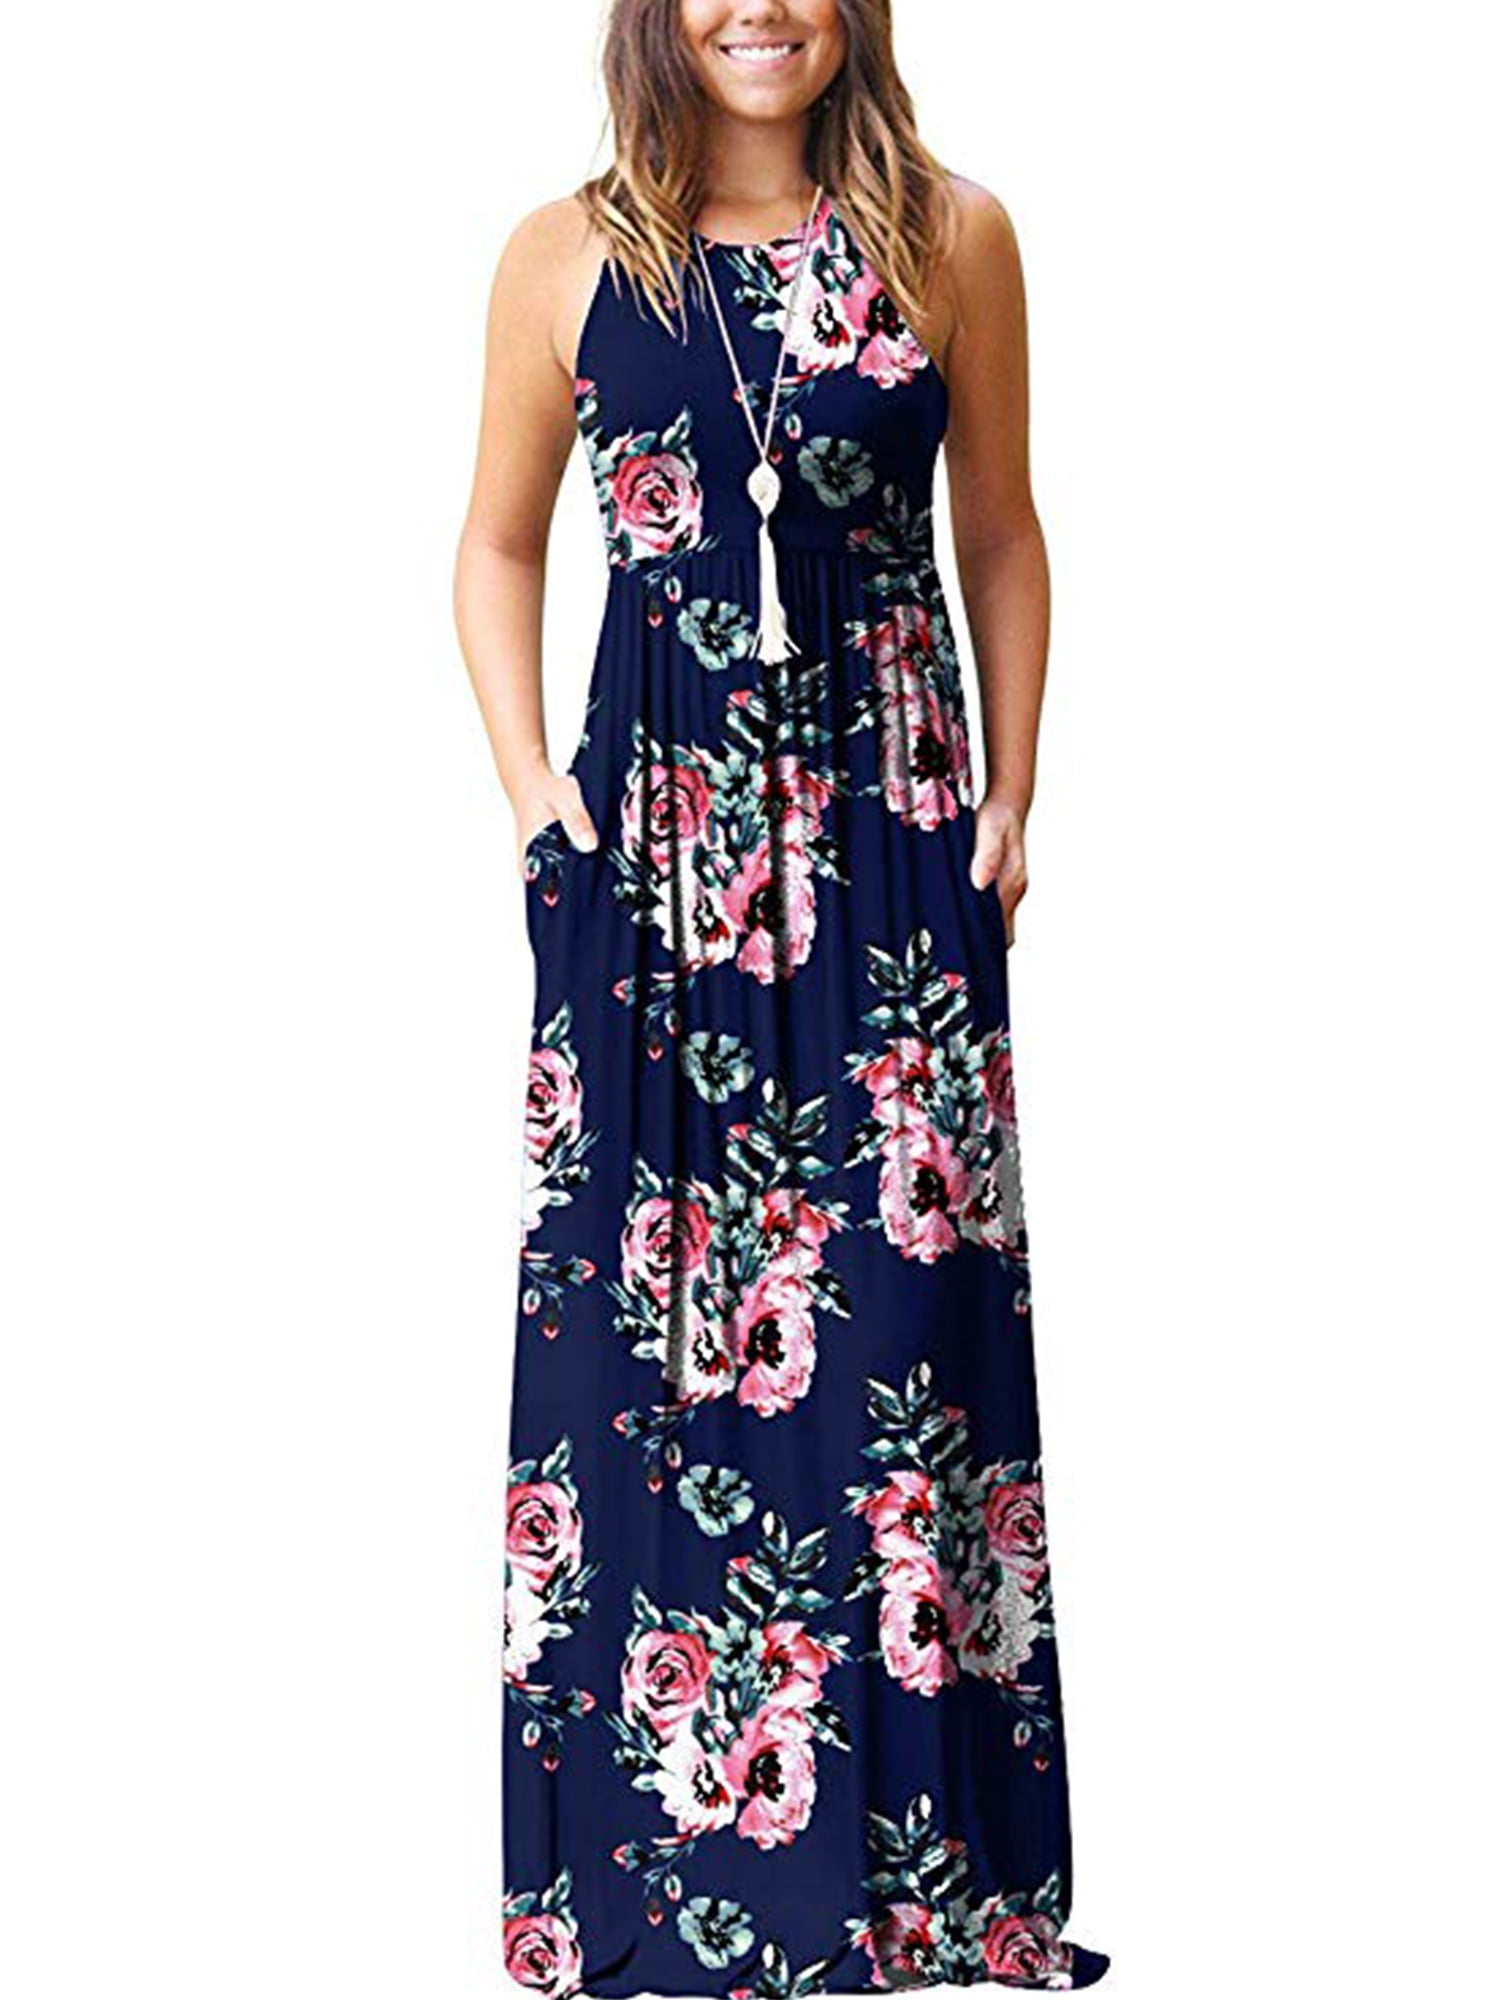 Sexy Dance - Hawaiian Holiday dresses For Women Floral Print Long Maxi ...